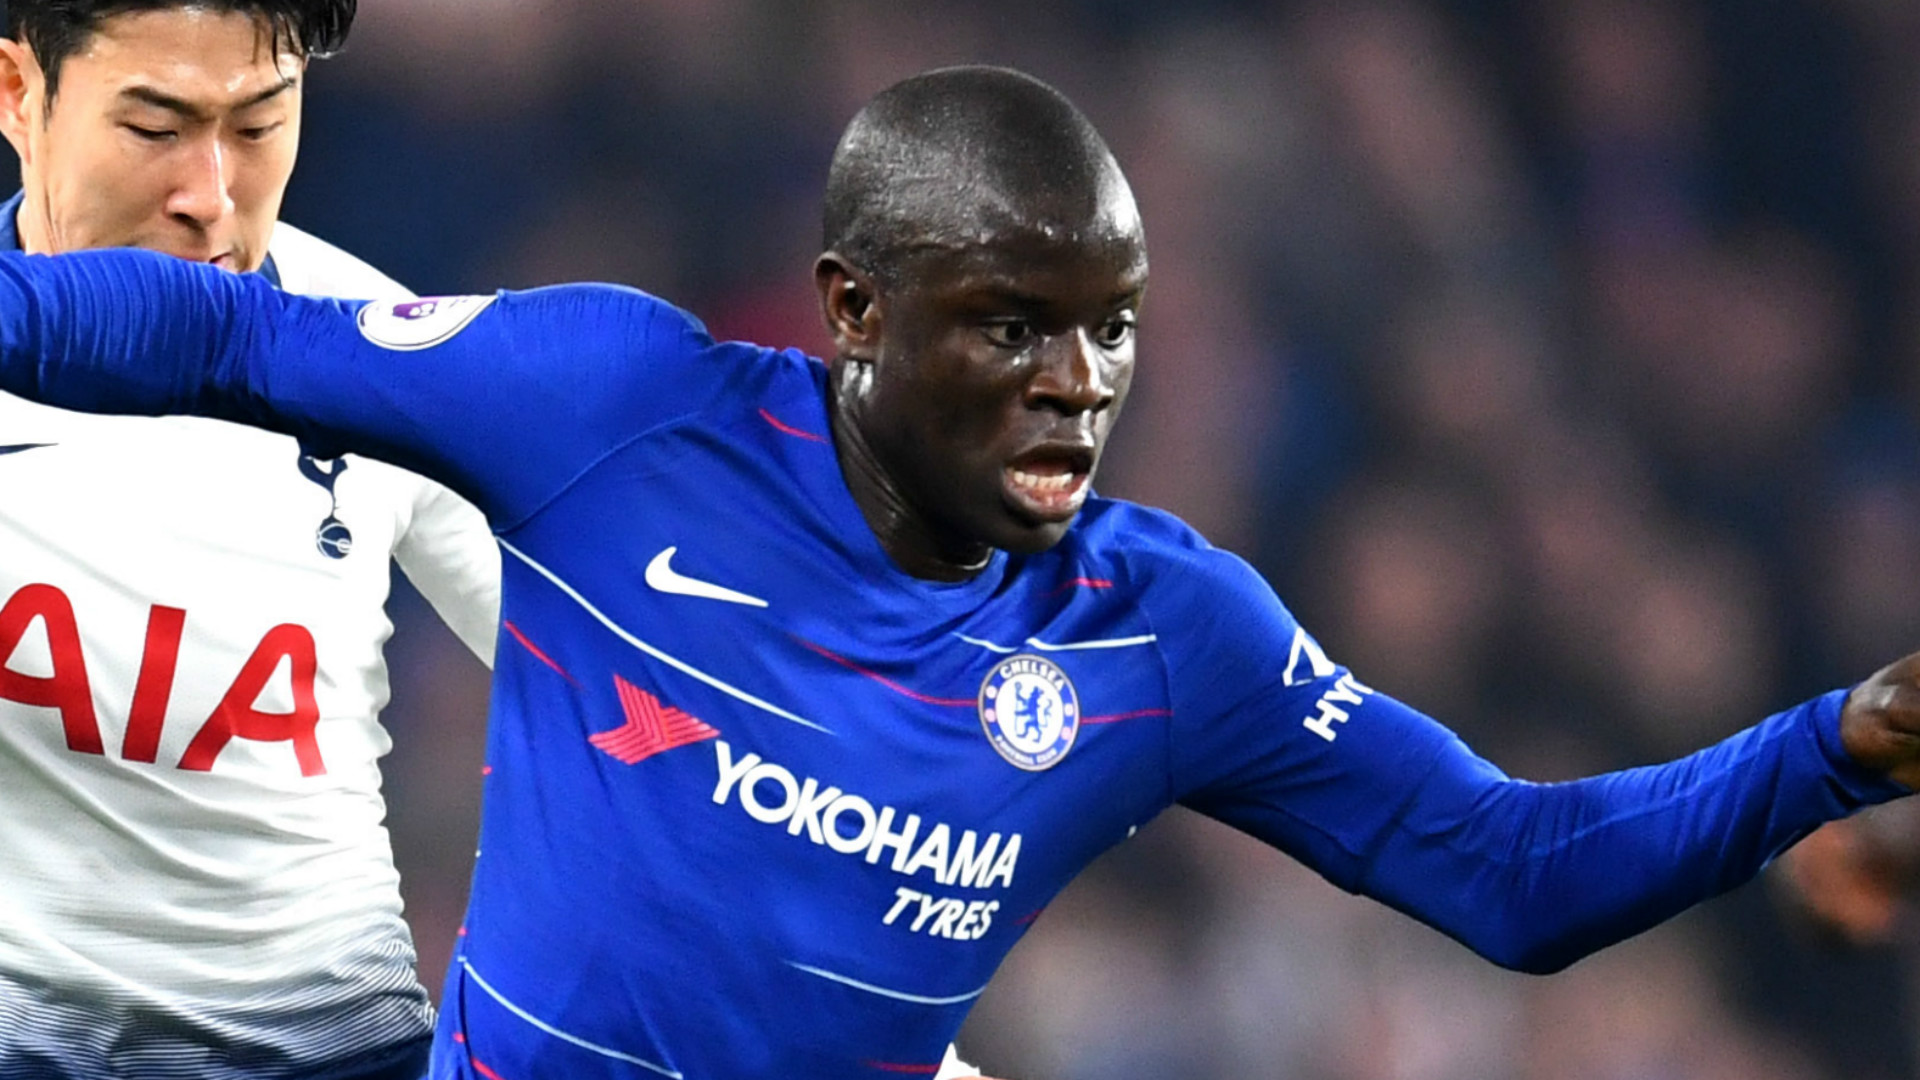 Transfer news and rumours LIVE: Real Madrid and Juve lead chase for Kante | Goal.com